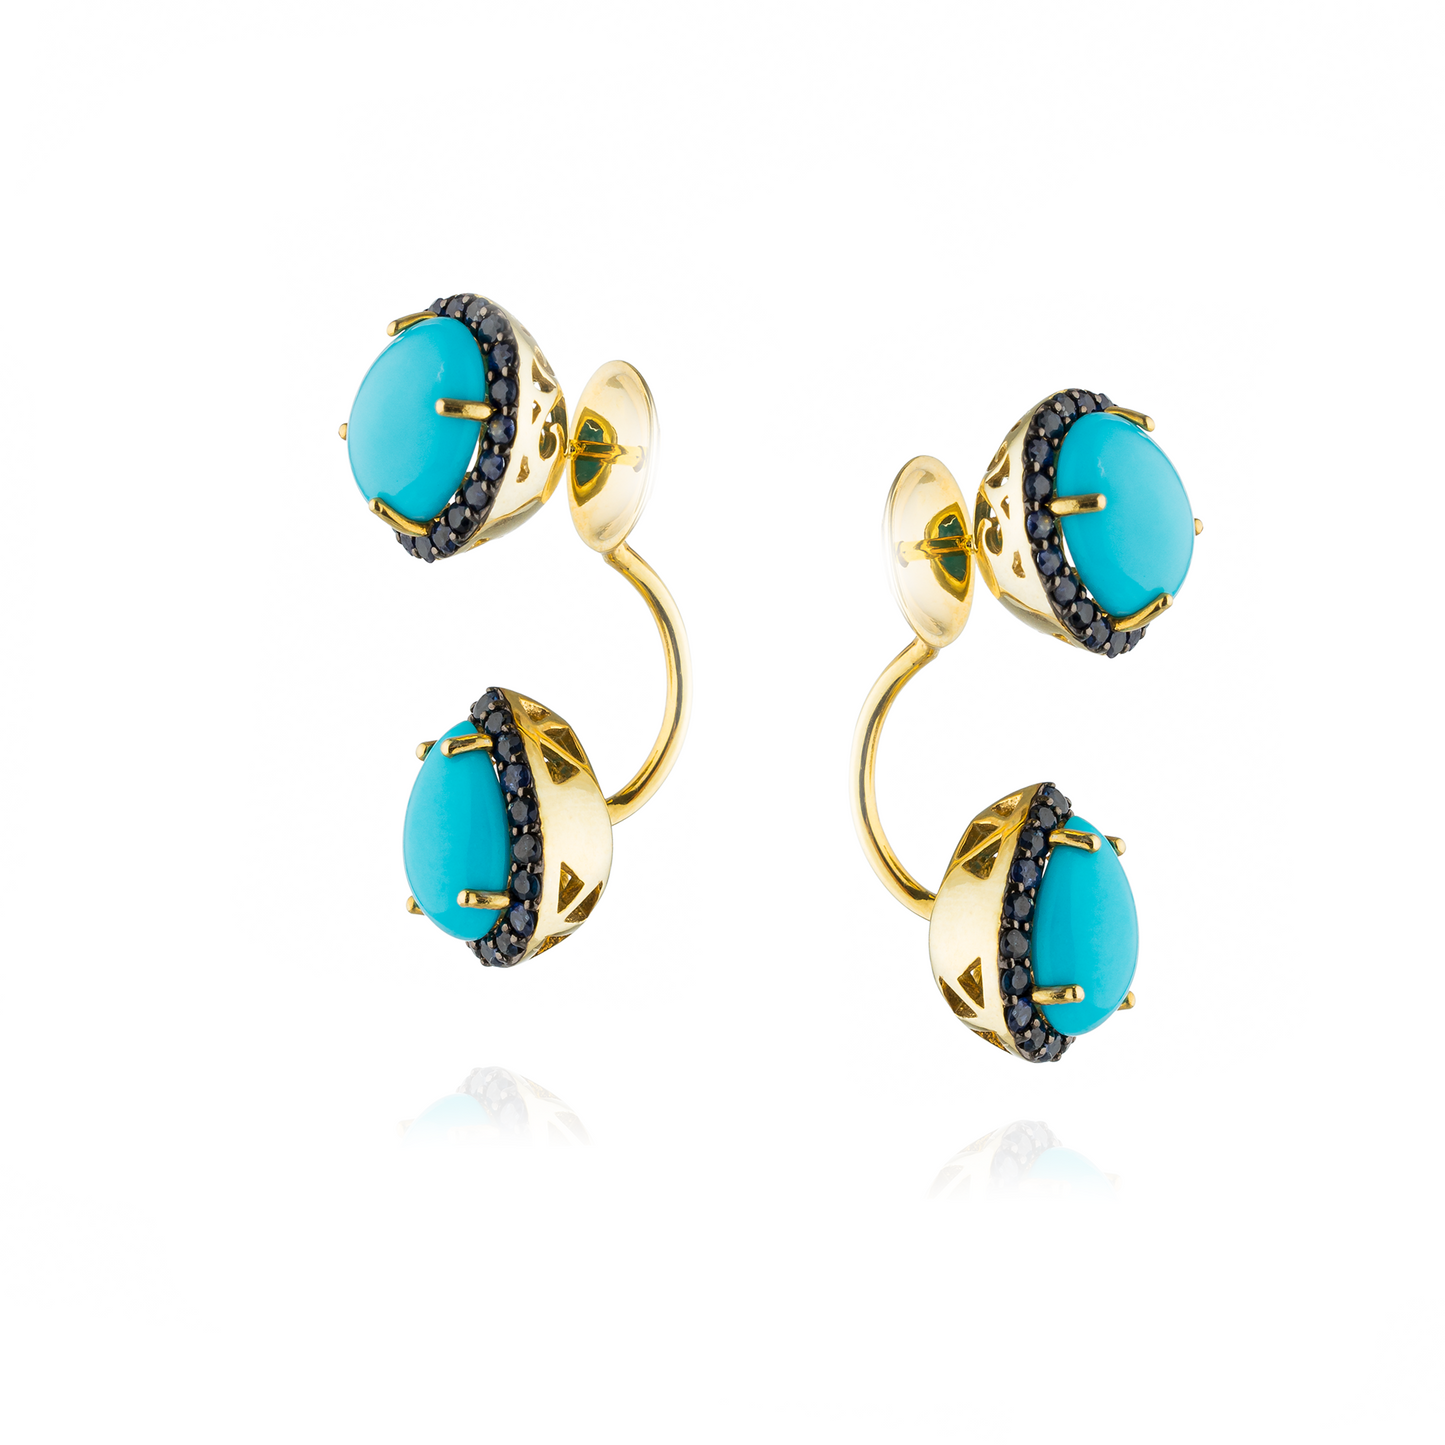 925 Silver Earrings Yellow Gold Plated  with Turquoise Cabouchon with Blue Sapphire